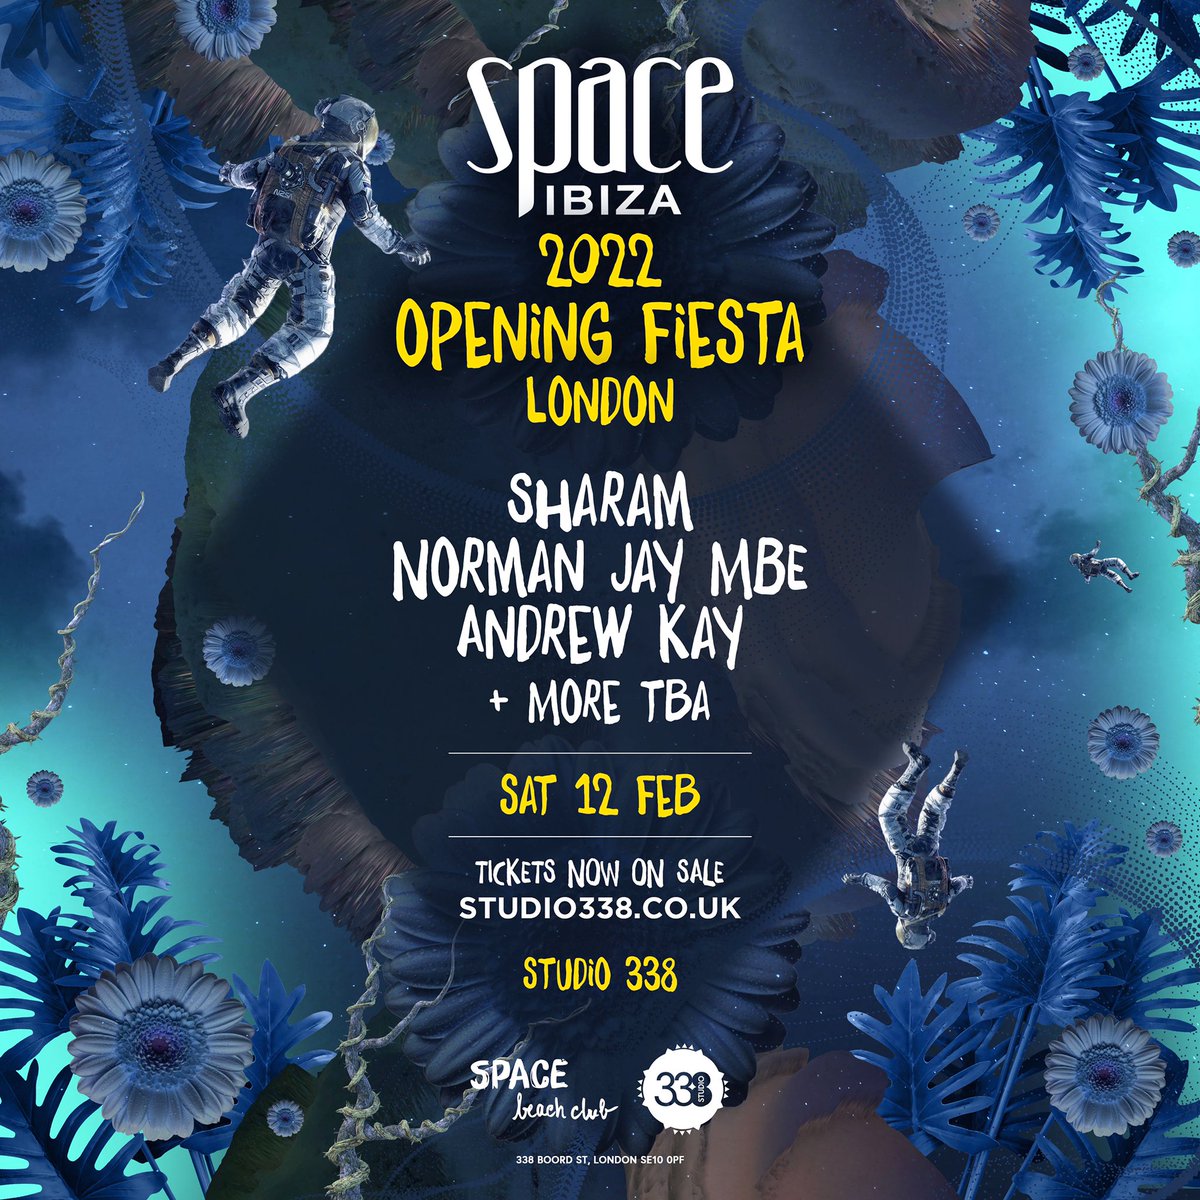 Space Ibiza Opening Fiesta line-up announced 🚀 Another classic line-up for the white isle powerhouse featuring Sharam, Norman Jay MBE and 338 favourite Andrew Kay... This one is not to be missed. 🎫 All remaining tickets and info - link.dice.fm/ge29c1ca1f46 #space #spaceibiza